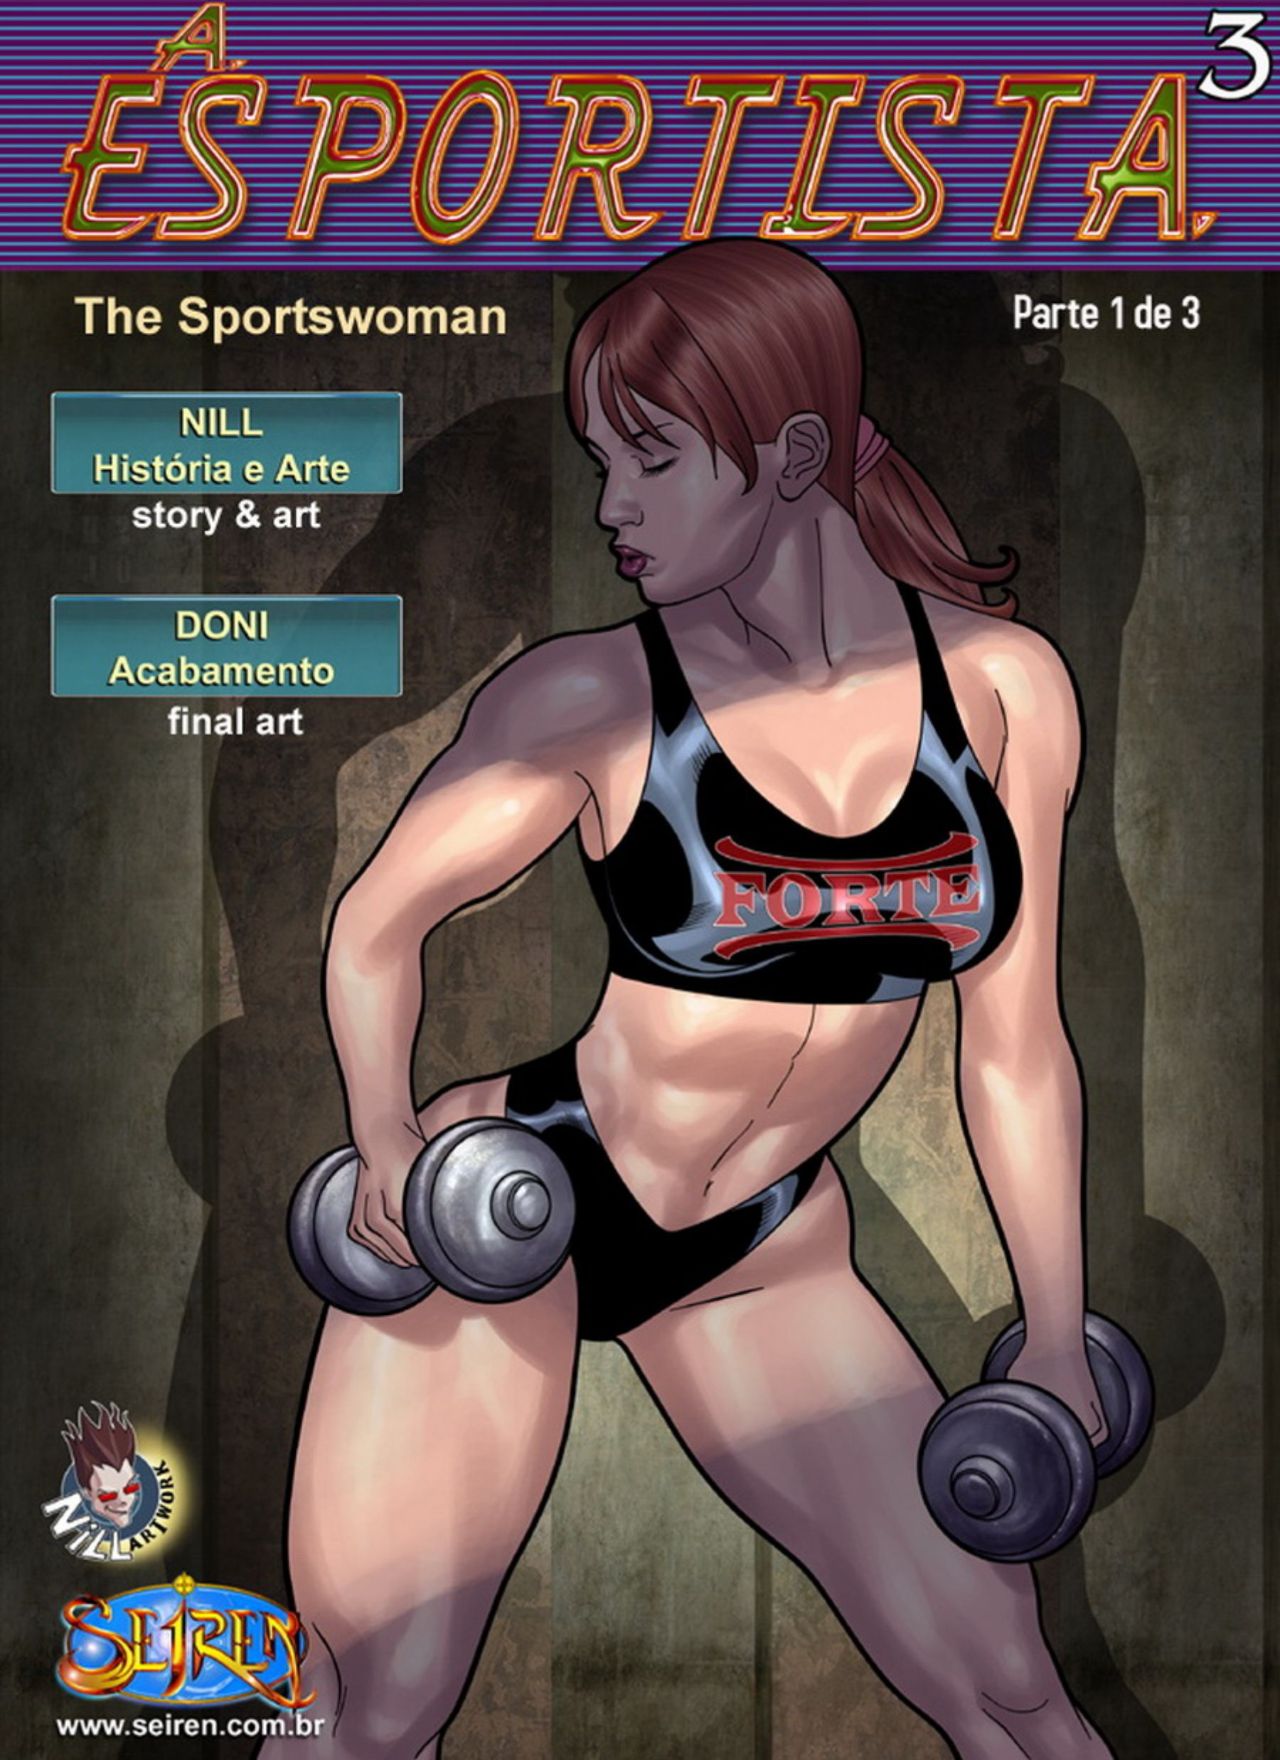 The Sportswoman Chapter 3: Part 1, 2 and 3 Porn Comic english 01